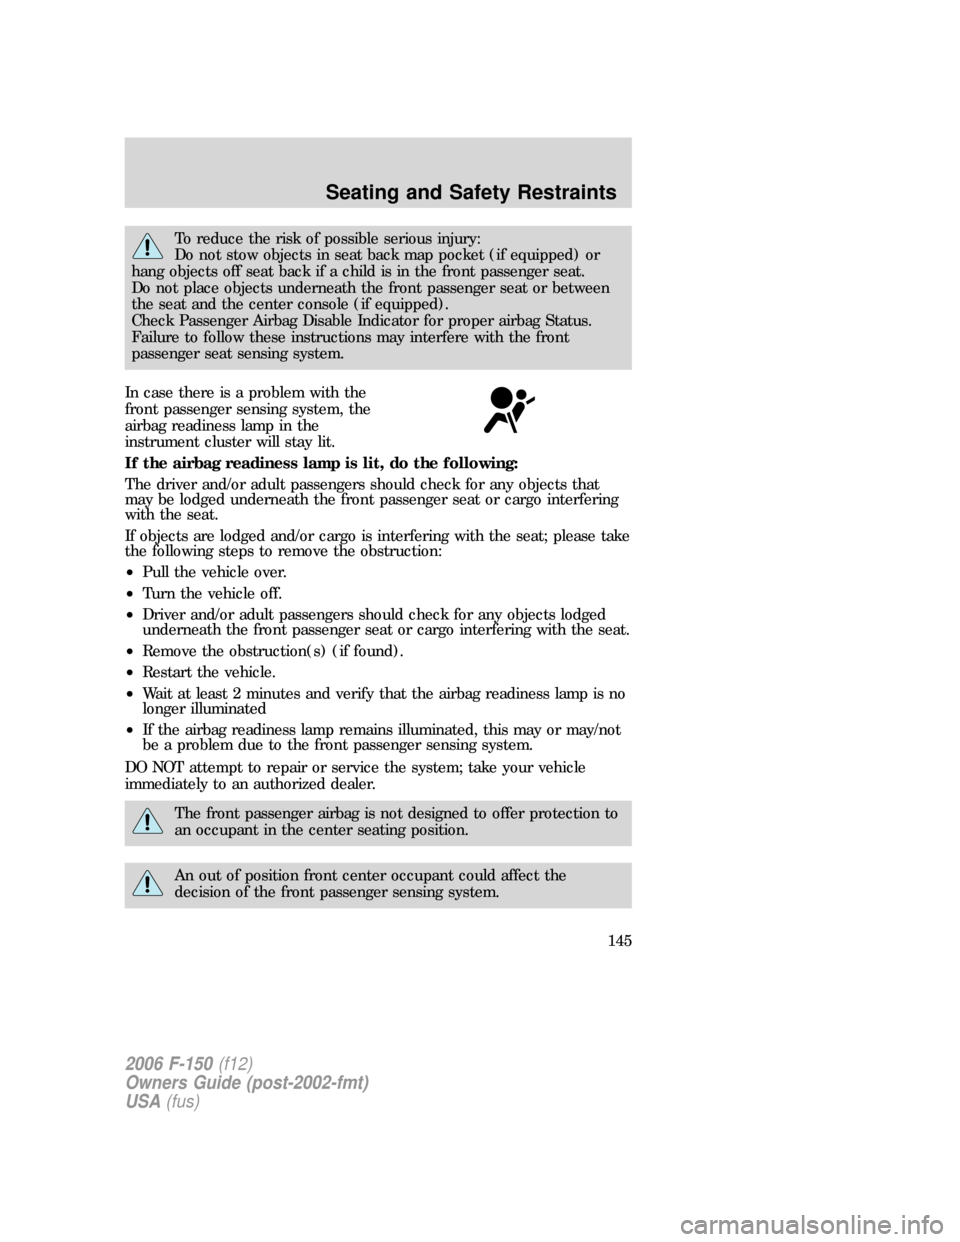 FORD F150 2006 11.G Owners Manual To reduce the risk of possible serious injury:
Do not stow objects in seat back map pocket (if equipped) or
hang objects off seat back if a child is in the front passenger seat.
Do not place objects u